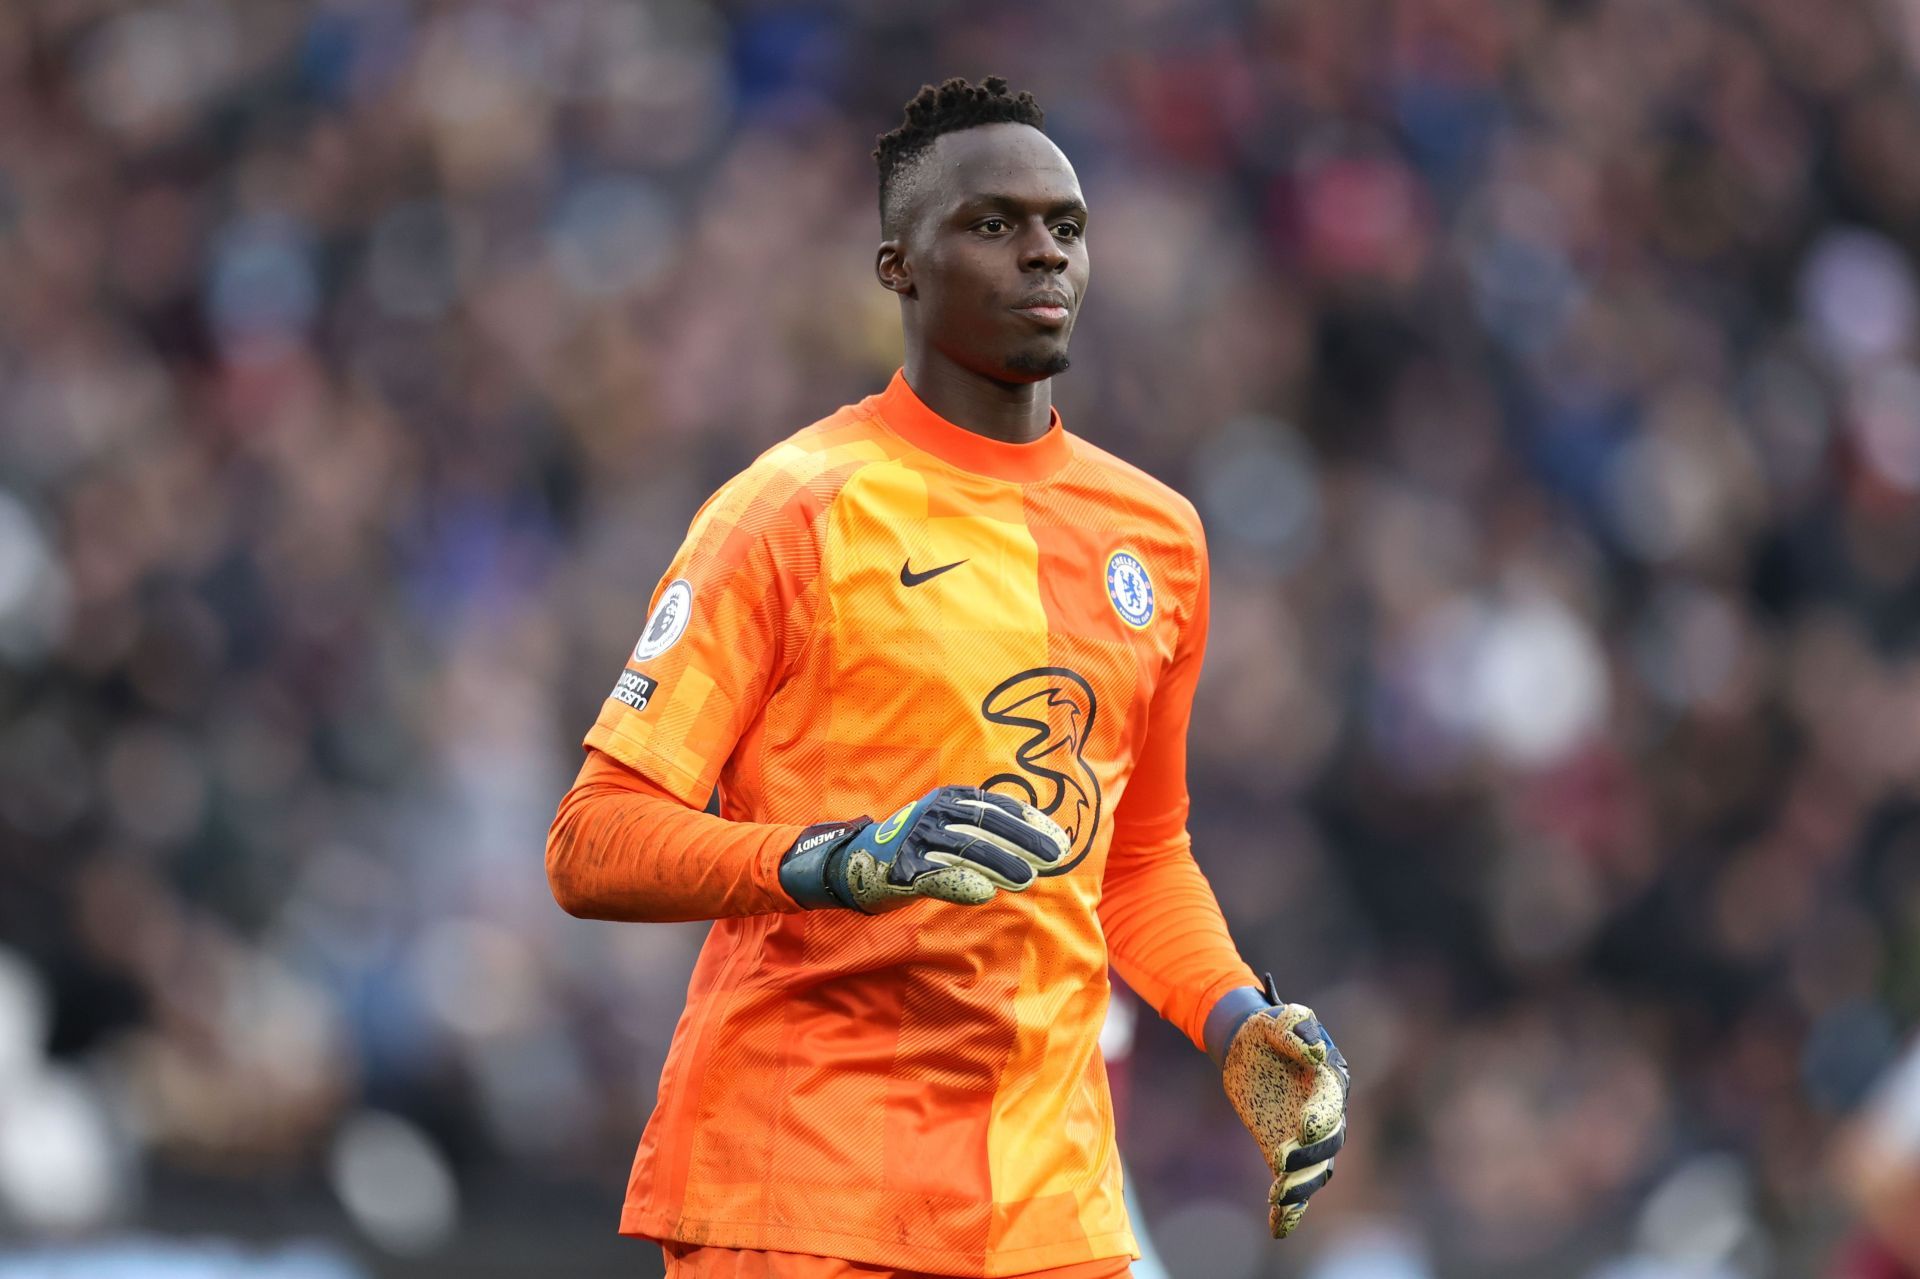 Edouard Mendy is one of the best goalkeepers in the world right now.